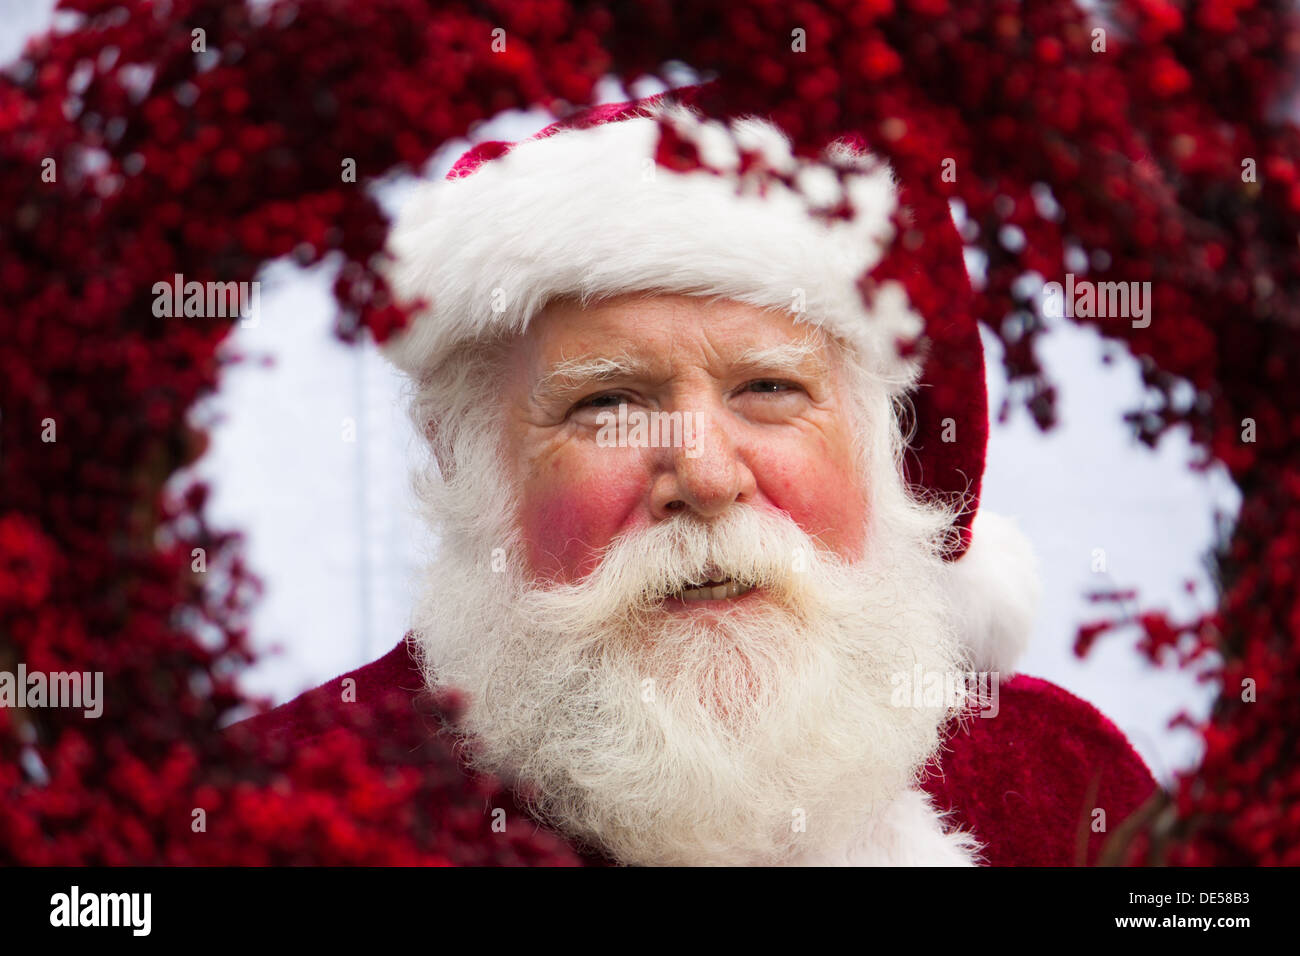 Santa-He sees you when your sleeping, he knows if your awake, he knows if you've been bad or good, so be good for goodness sake. Stock Photo